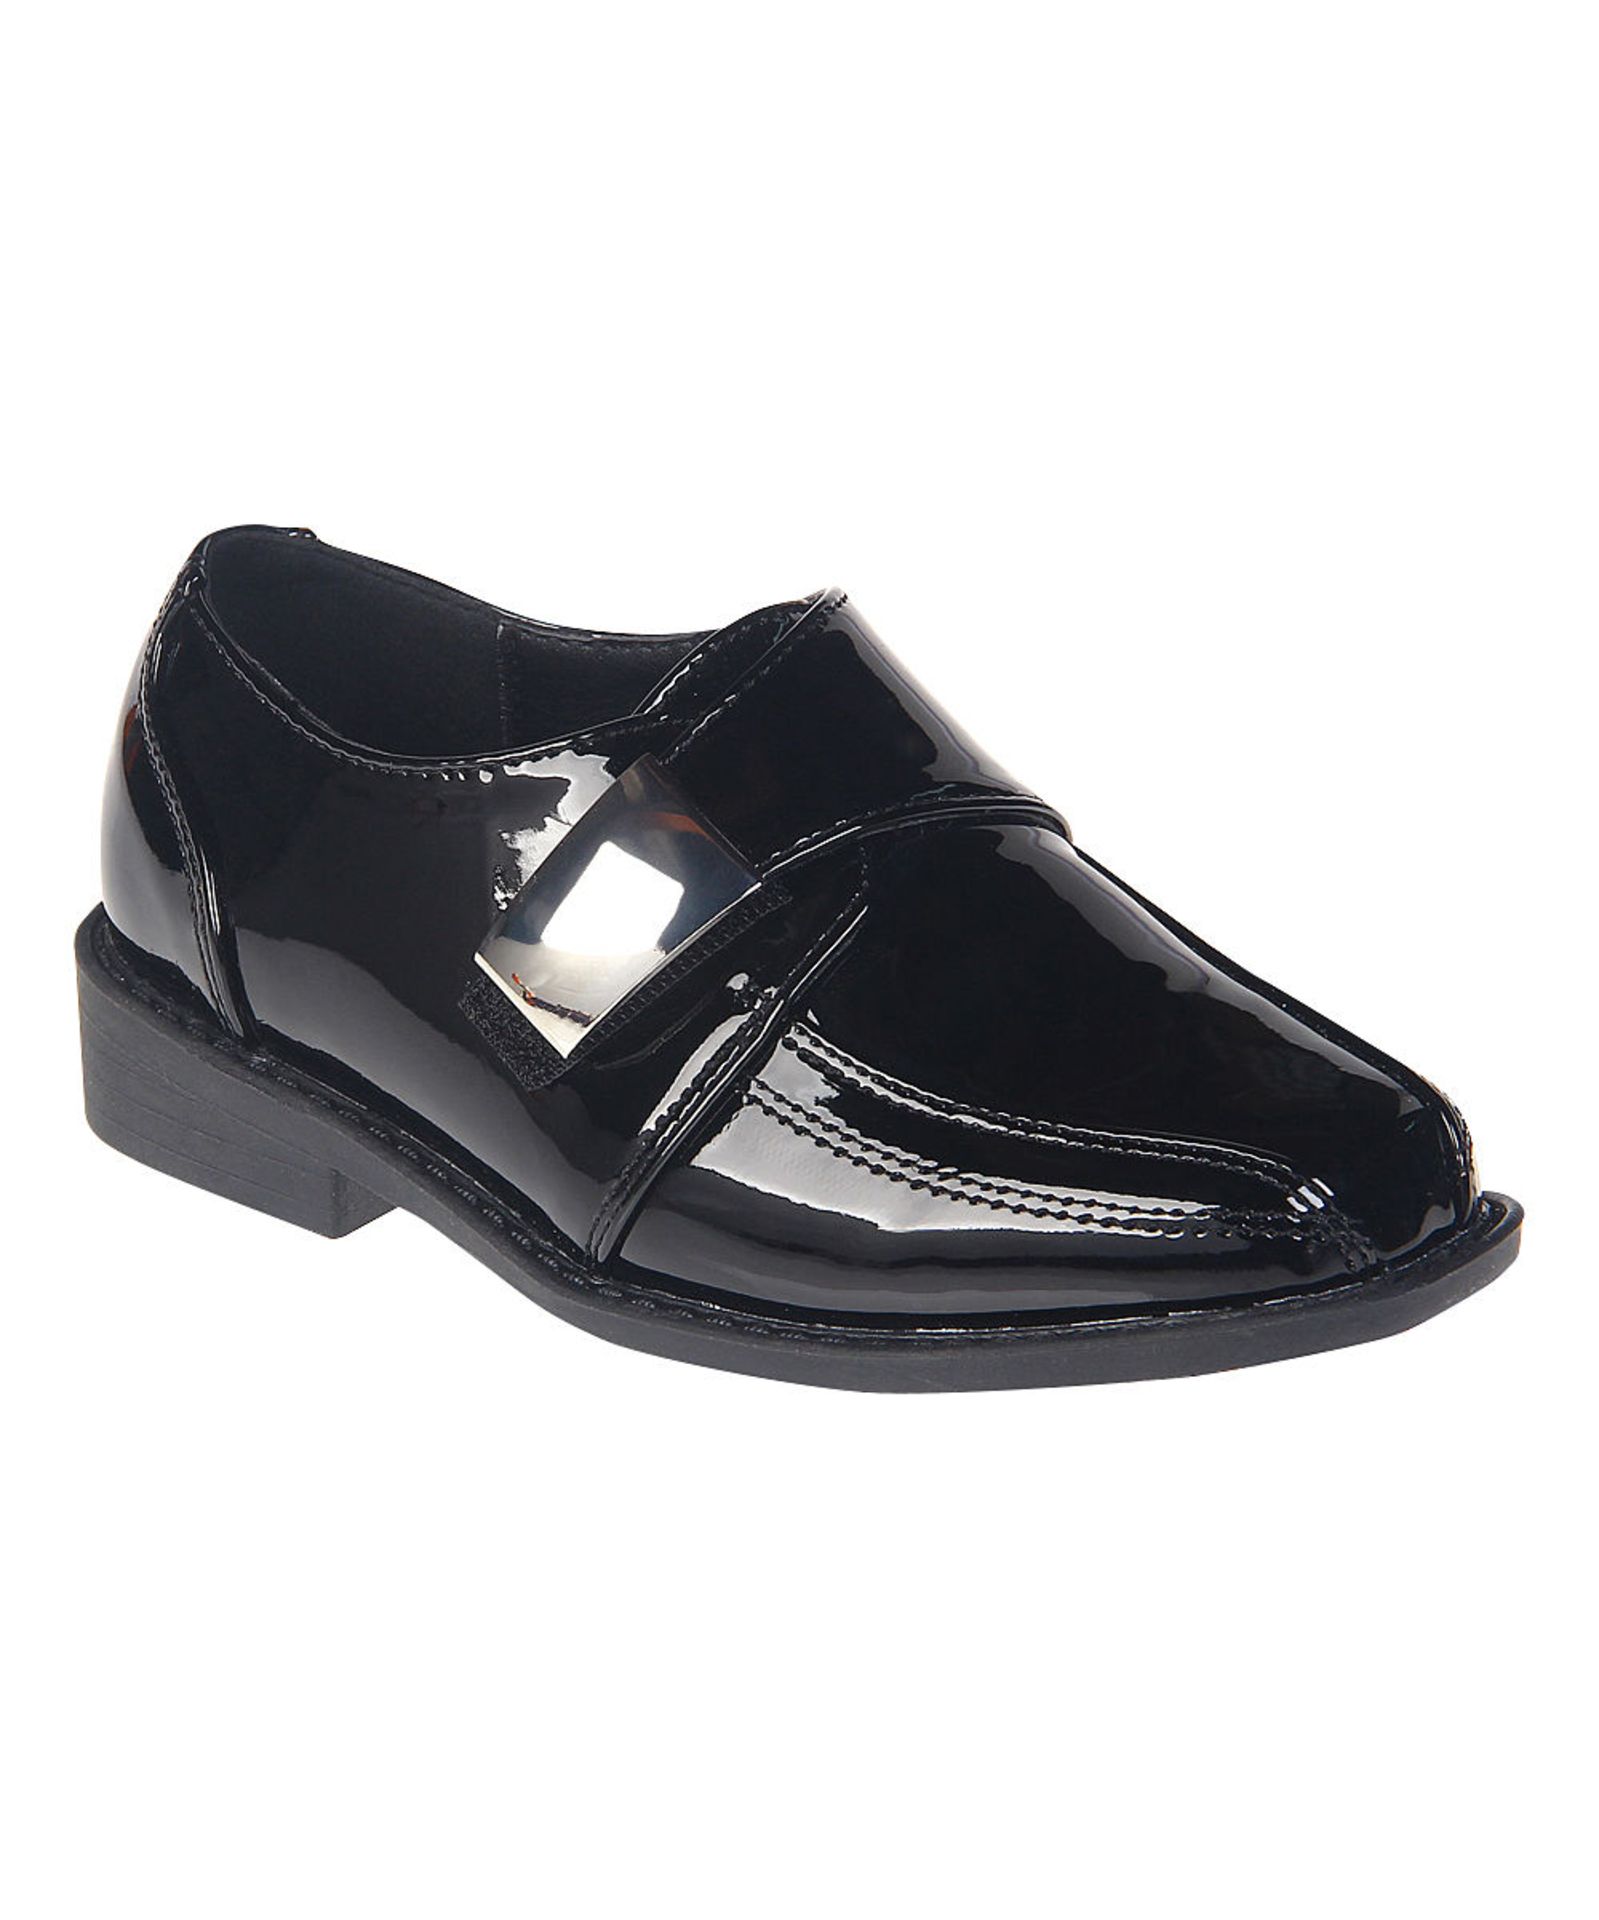 Jelly Beans, Black Give Loafer, Size Toddler 9 (New with box) [Ref: 36200366]